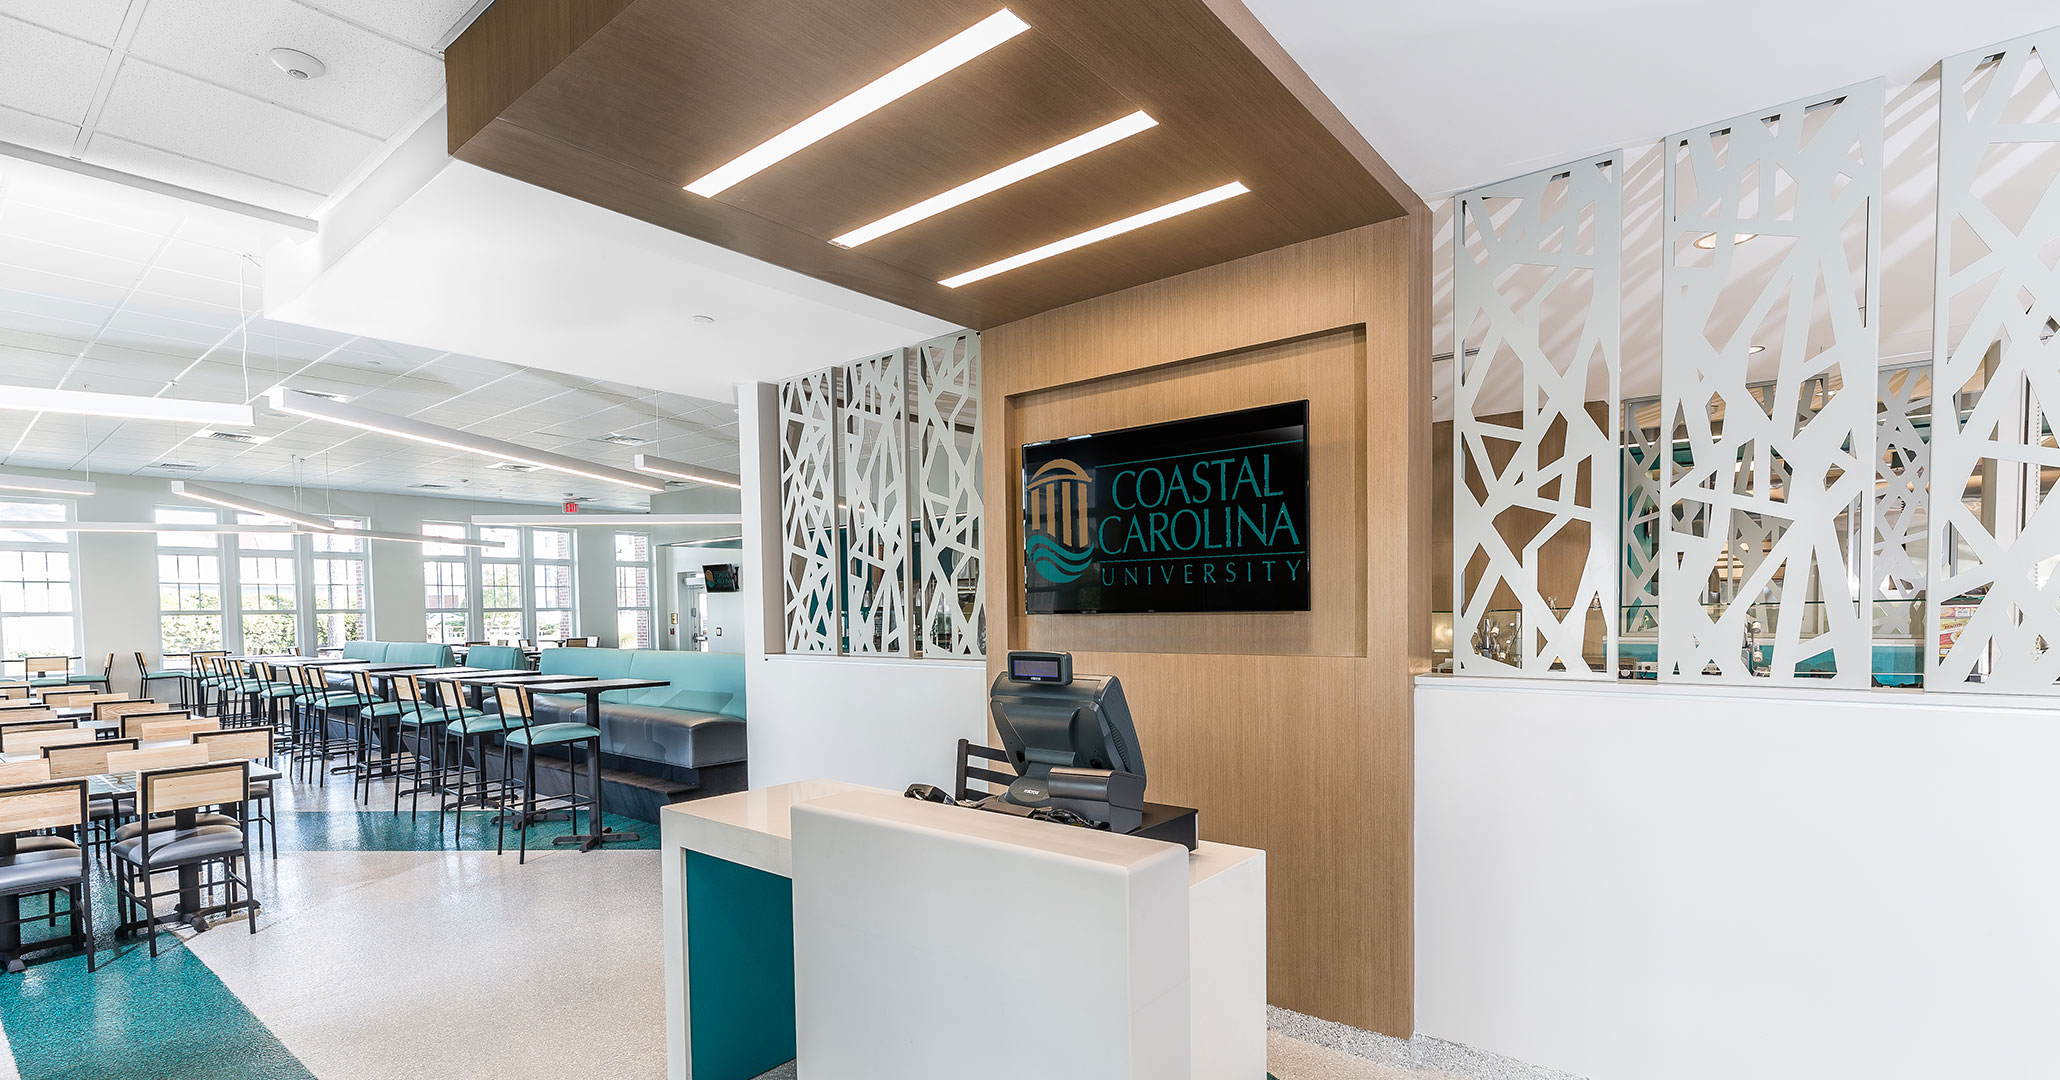 Boudreaux architects designed the modern interior for the college’s new Dining Hall.